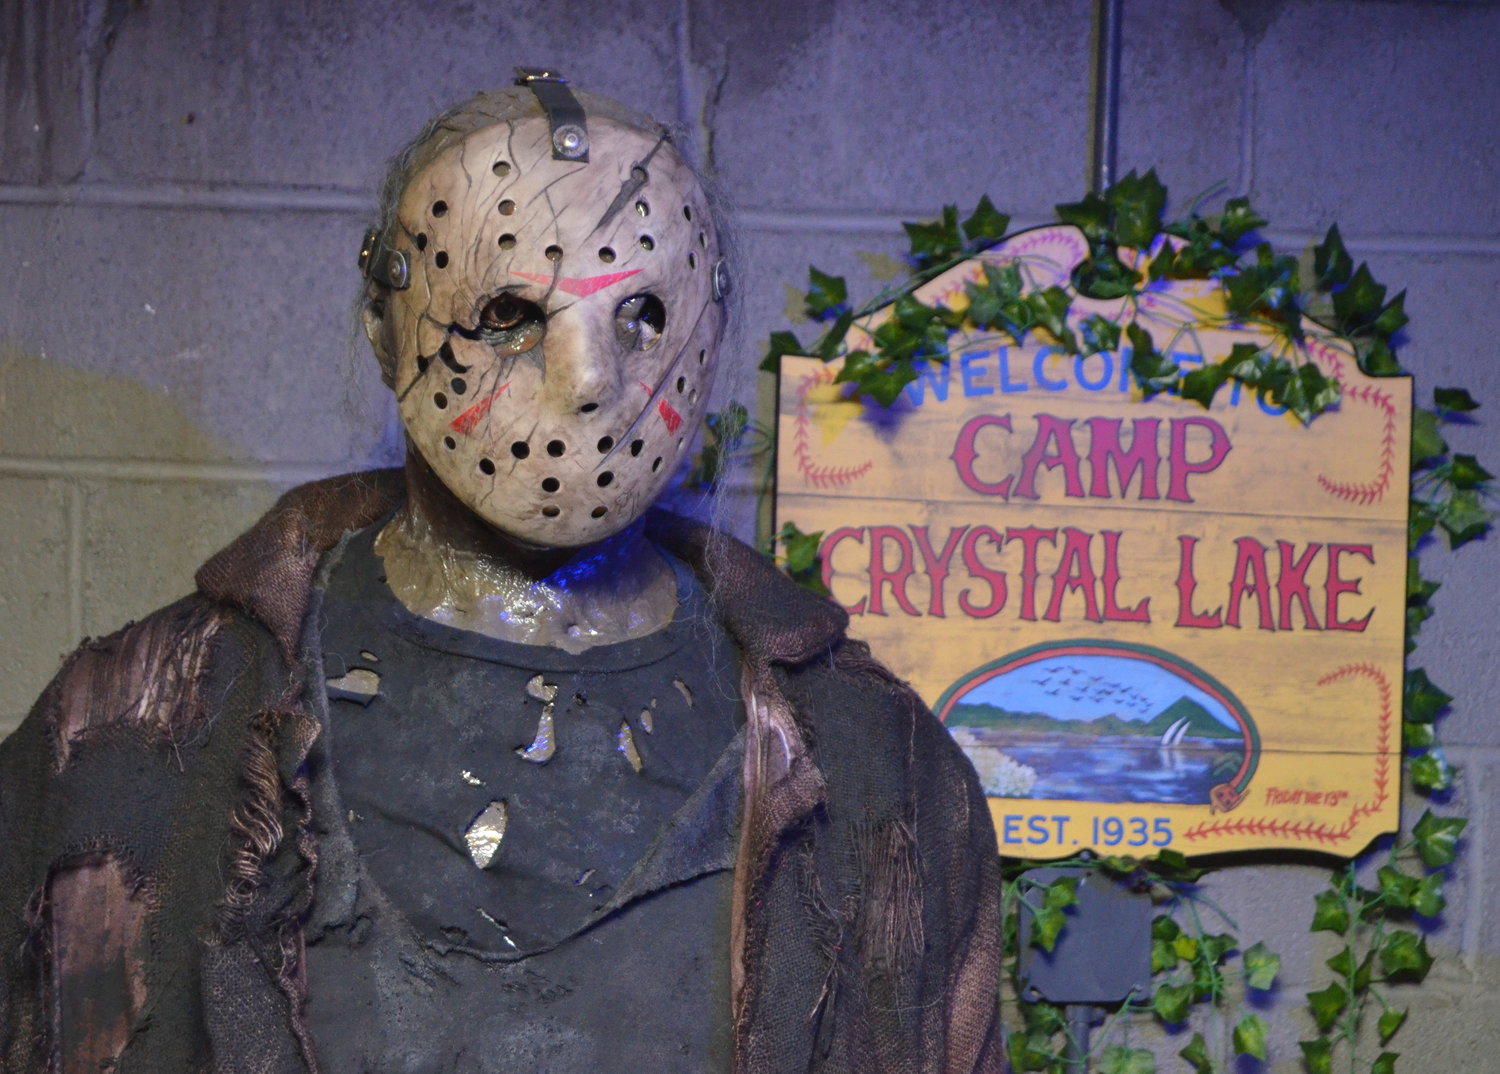 Welcome to Camp Crystal Lake? More like, welcome to the Long Island Monster Gallery. The Halloween-themed art gallery, owned by Jason Kloos, of Merrick, featuring over 30 life-size horror sculptures, opened for the season on Oct. 1.